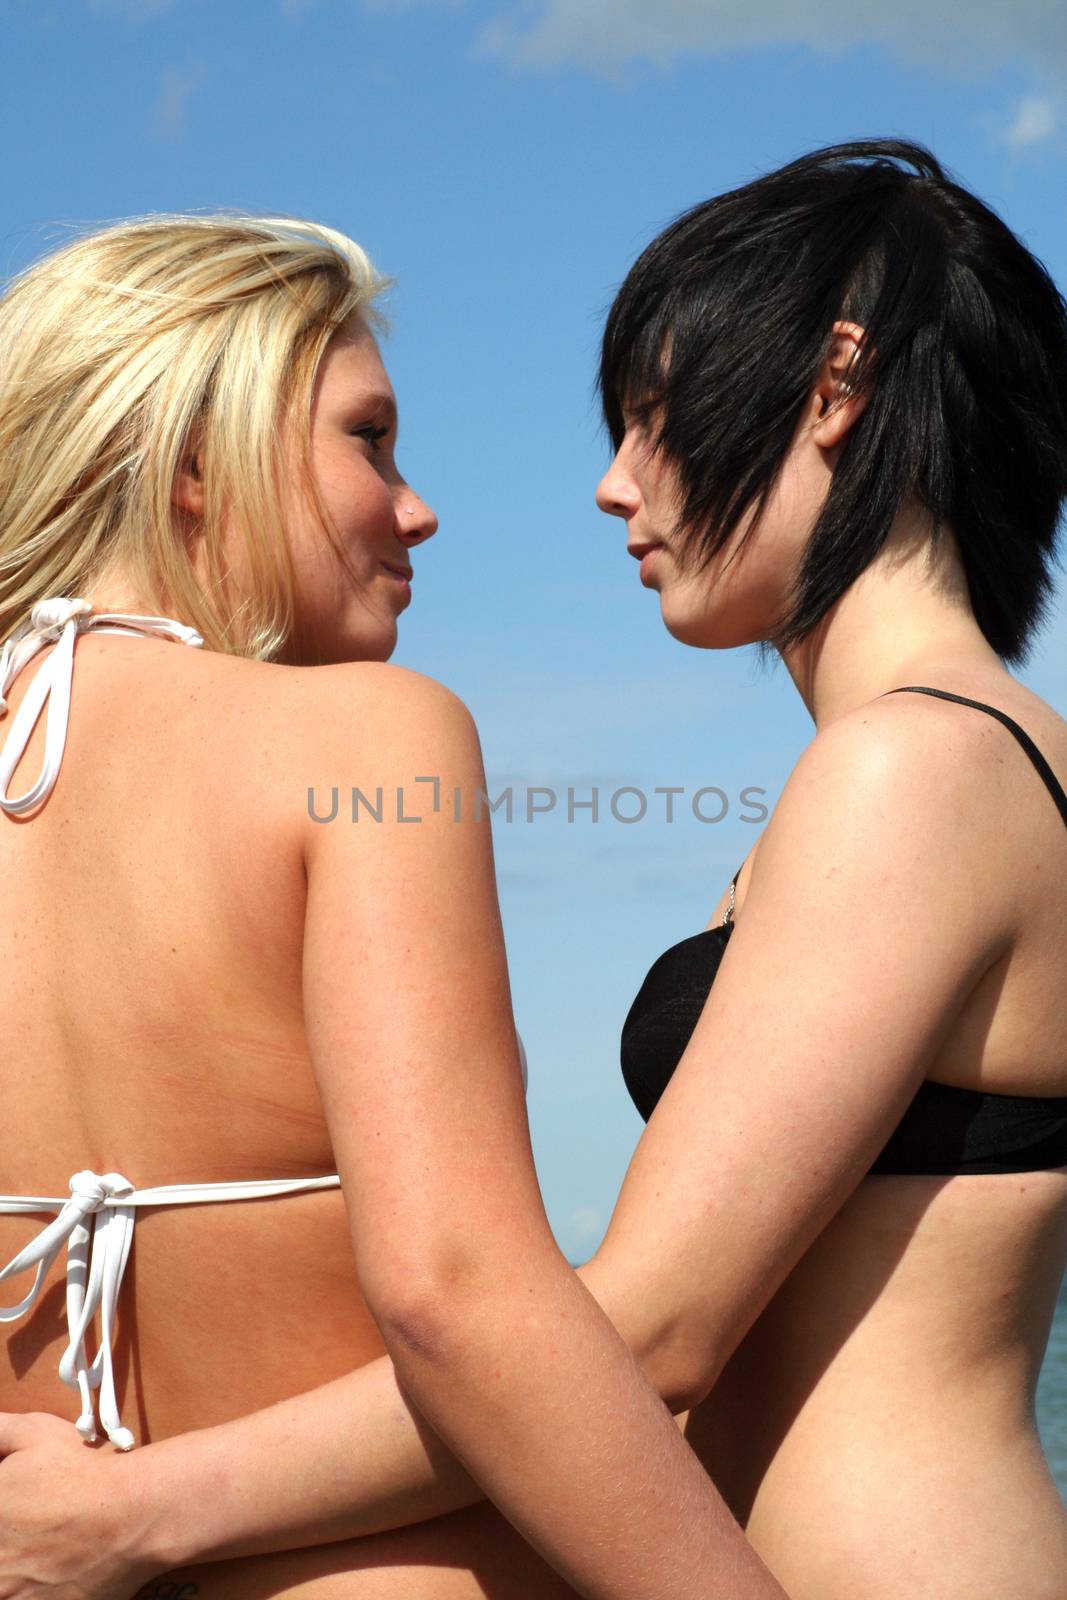 two women at the Beach holding each other, flirting